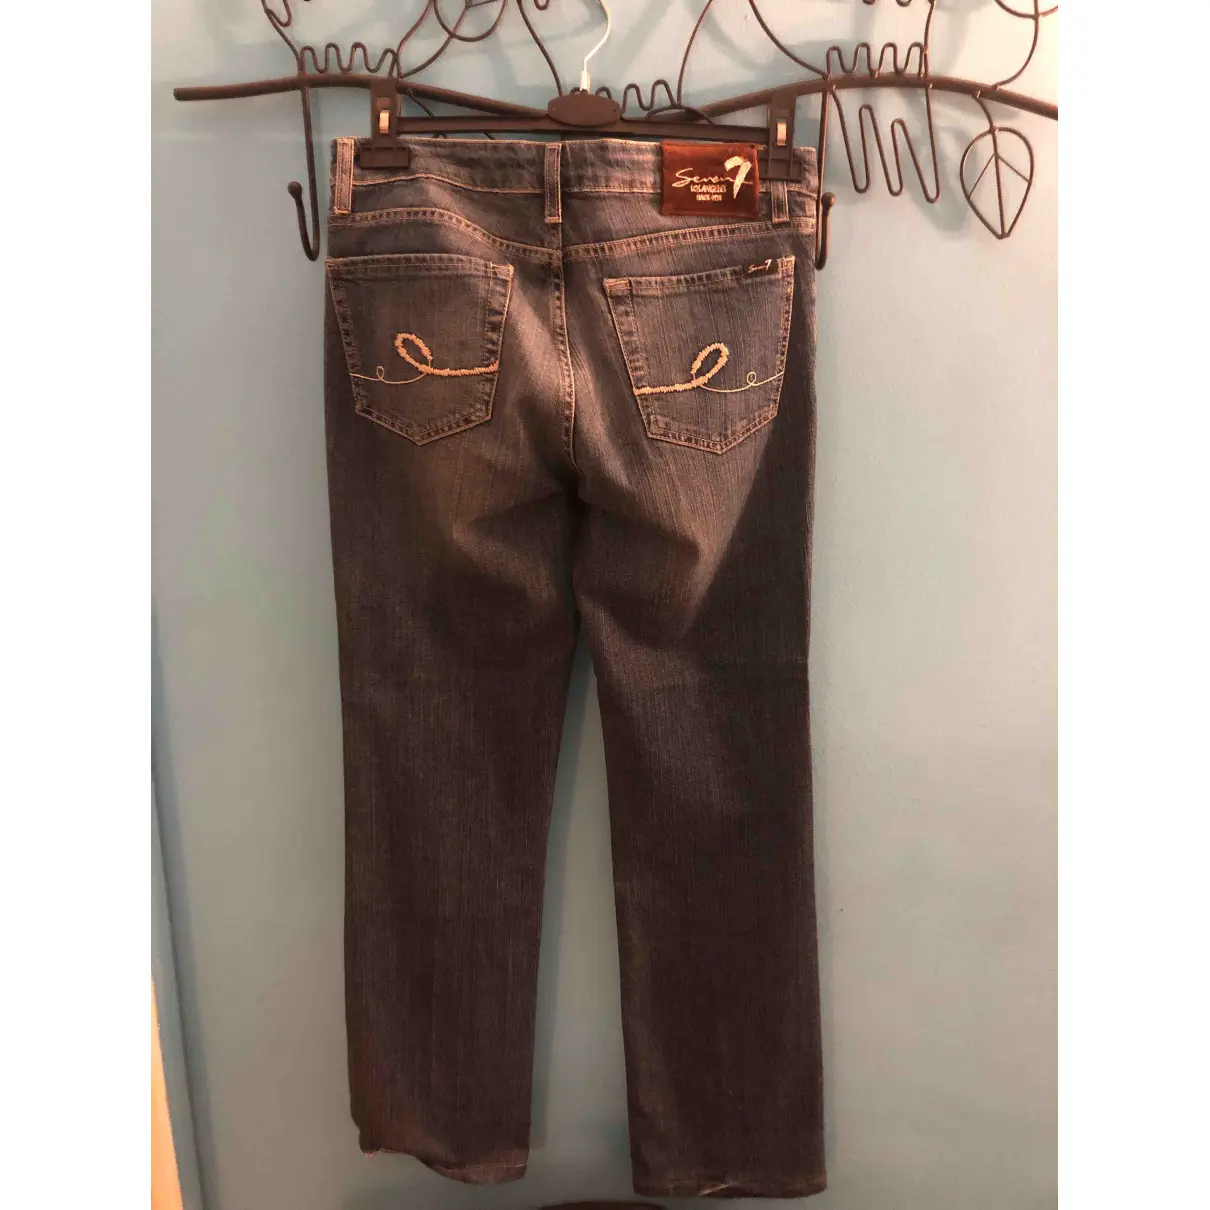 Buy 7 For All Mankind Large jeans online